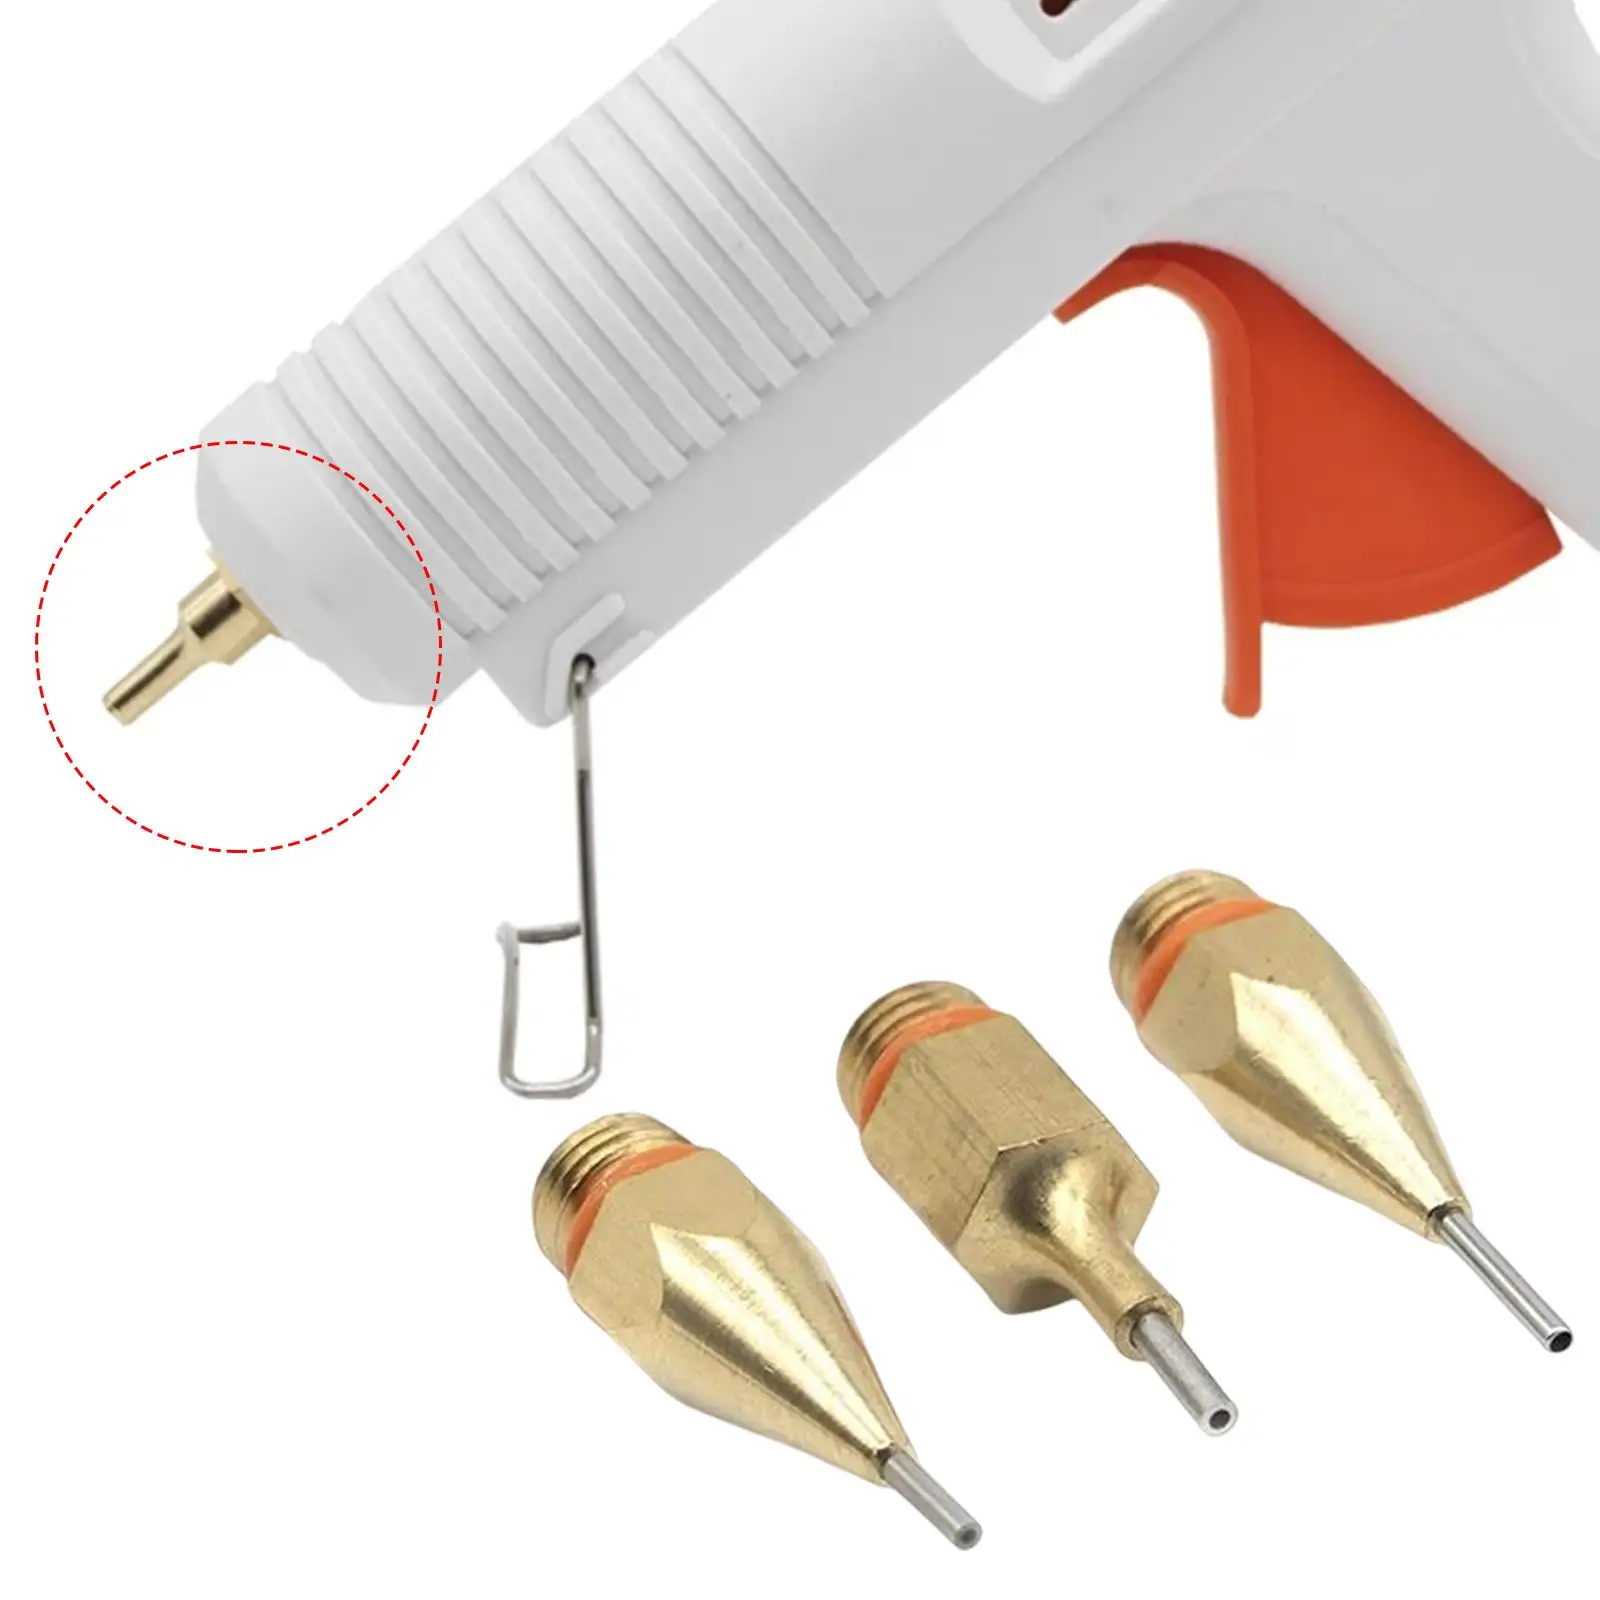 3x Hot Melt Glue Tool Nozzle Small Hole Replacement Assortment 1mm 1.3mm 1.5mm Copper Nozzles Anti Leakage Nozzle Professional